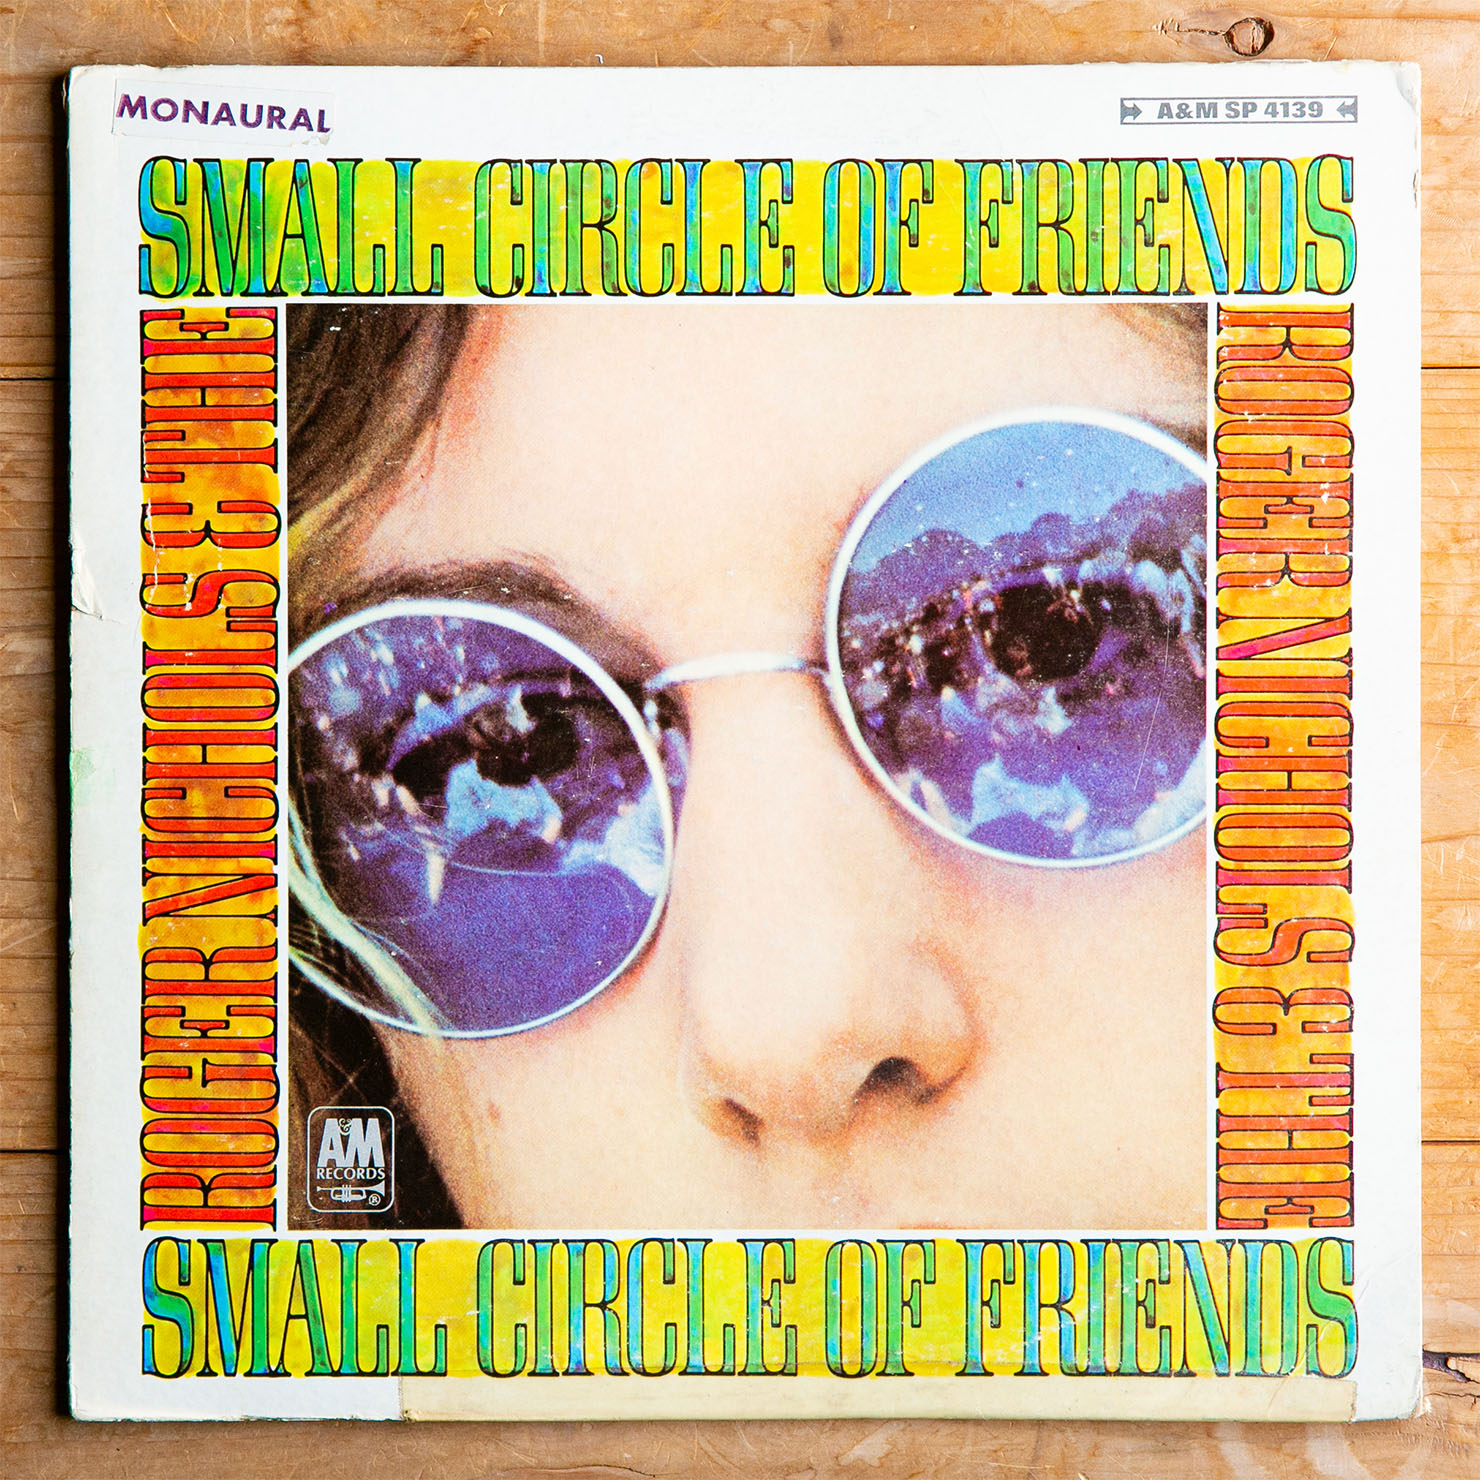 Roger Nichols & The Small Circle Of Friends『Roger Nichols & The Small Circle Of Friends』